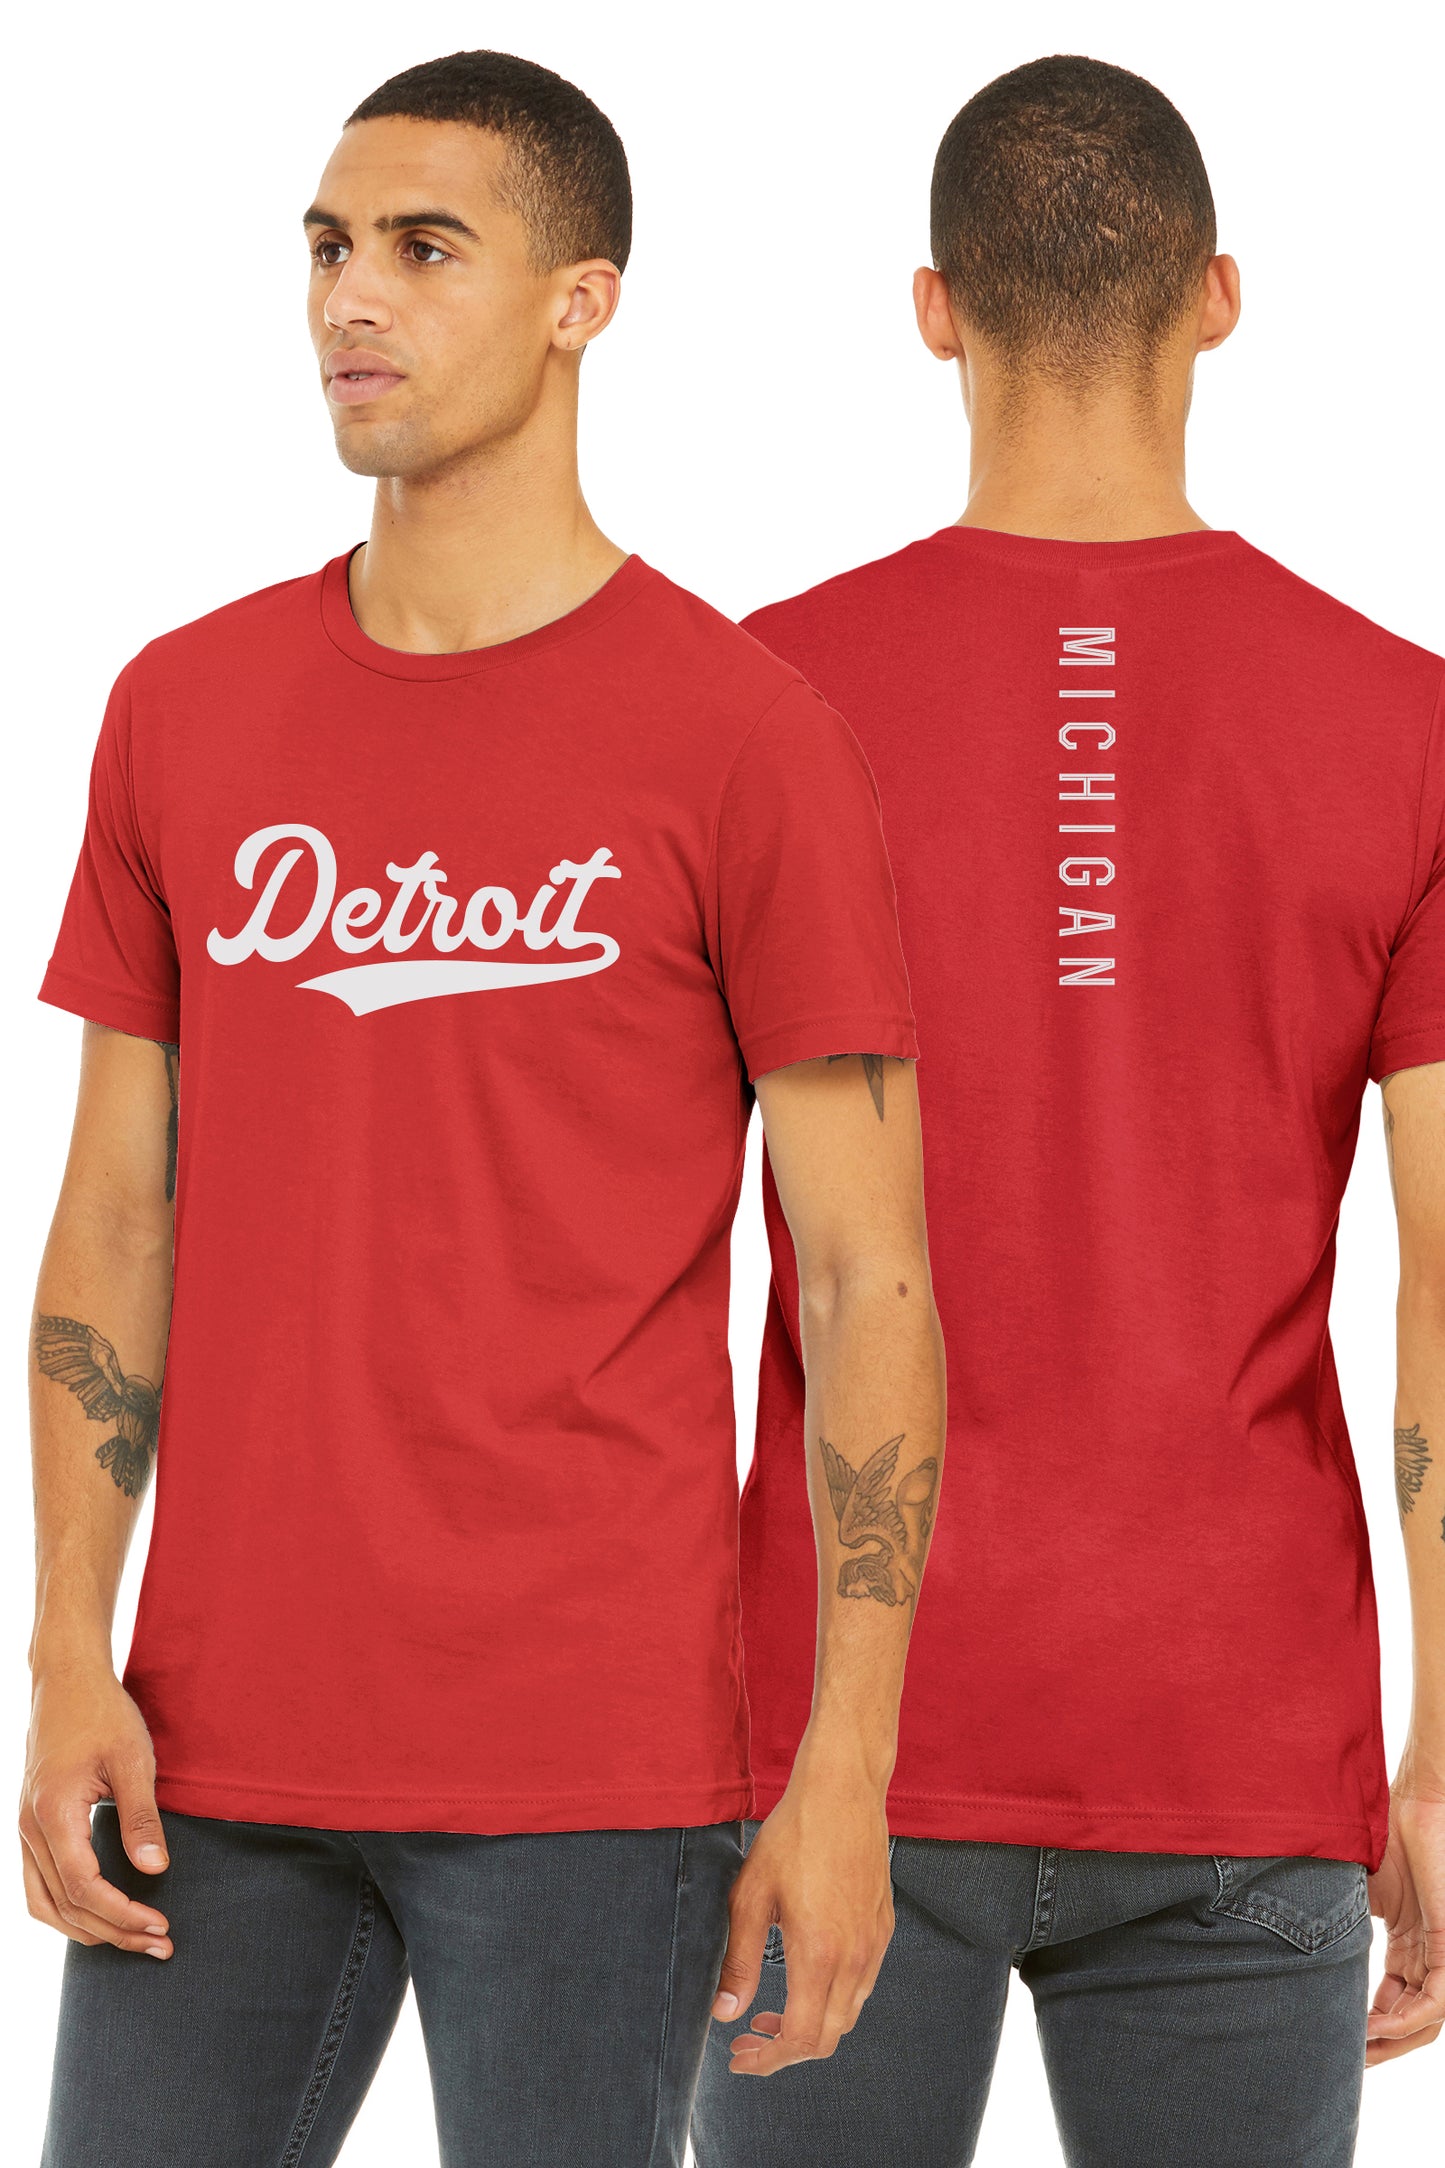 Daxton Adult Unisex Tshirt Detroit Script with Michigan Vertical on the Back